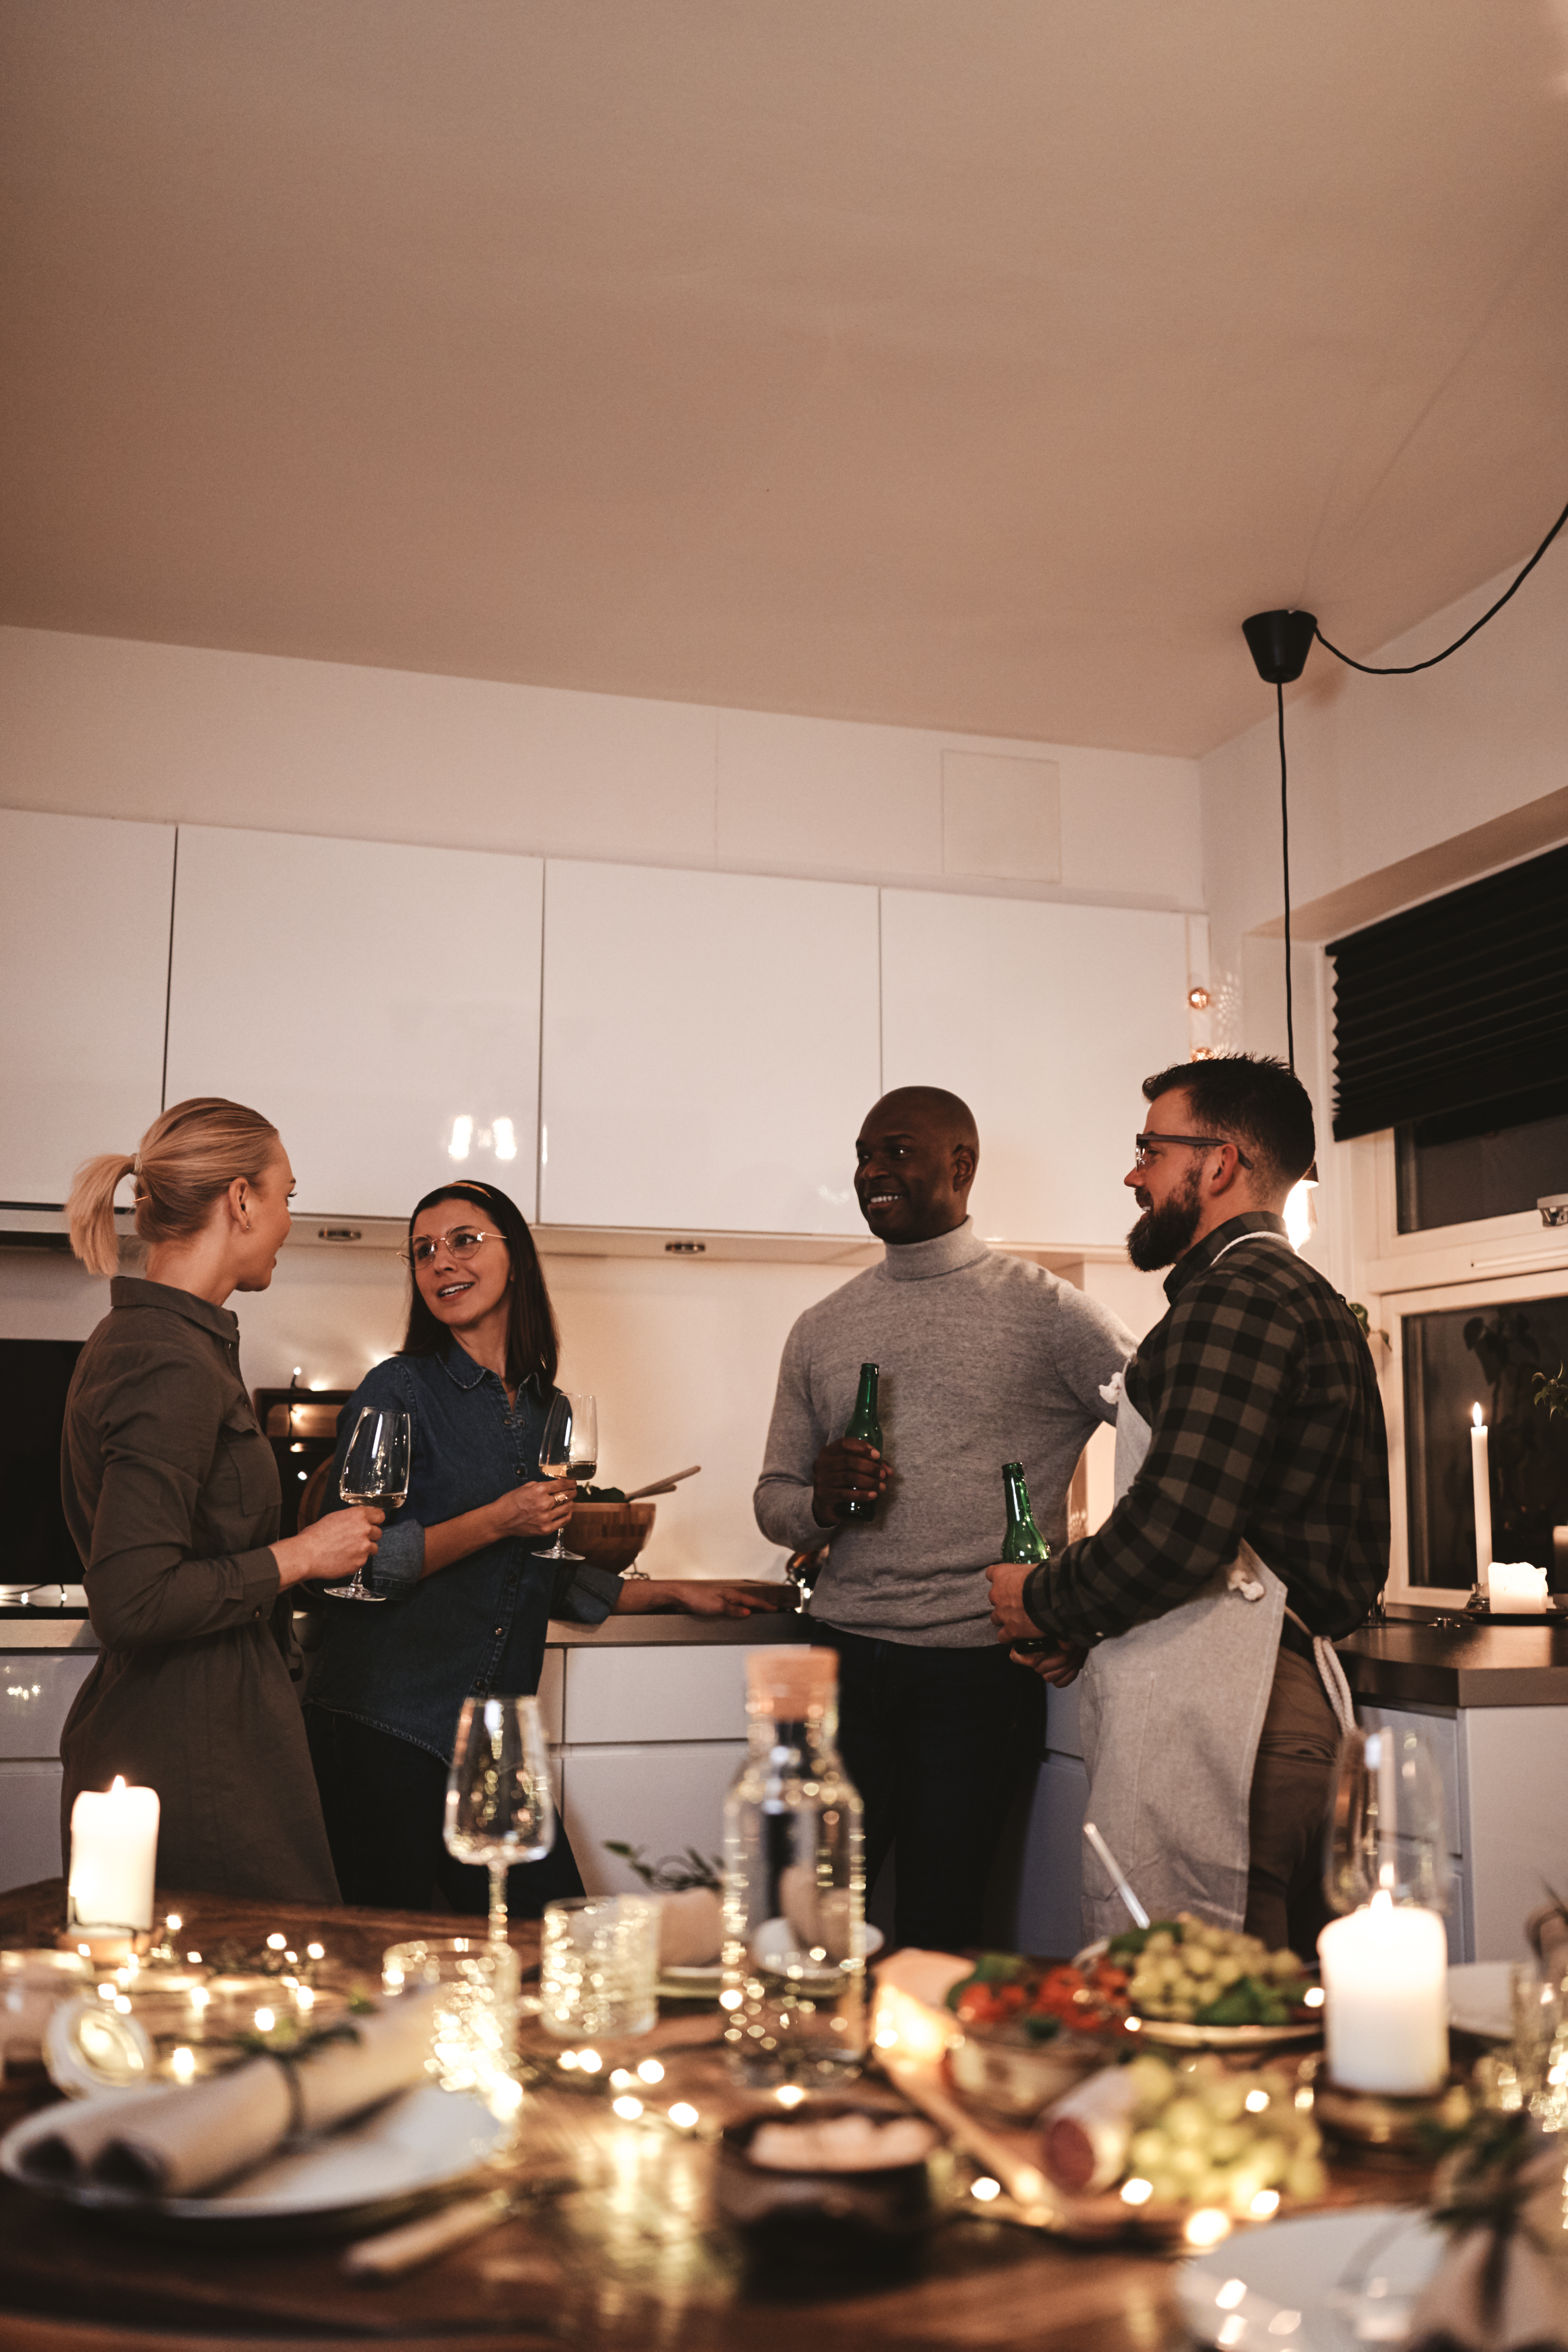 A group of people in the kitchen | Source: Shutterstock